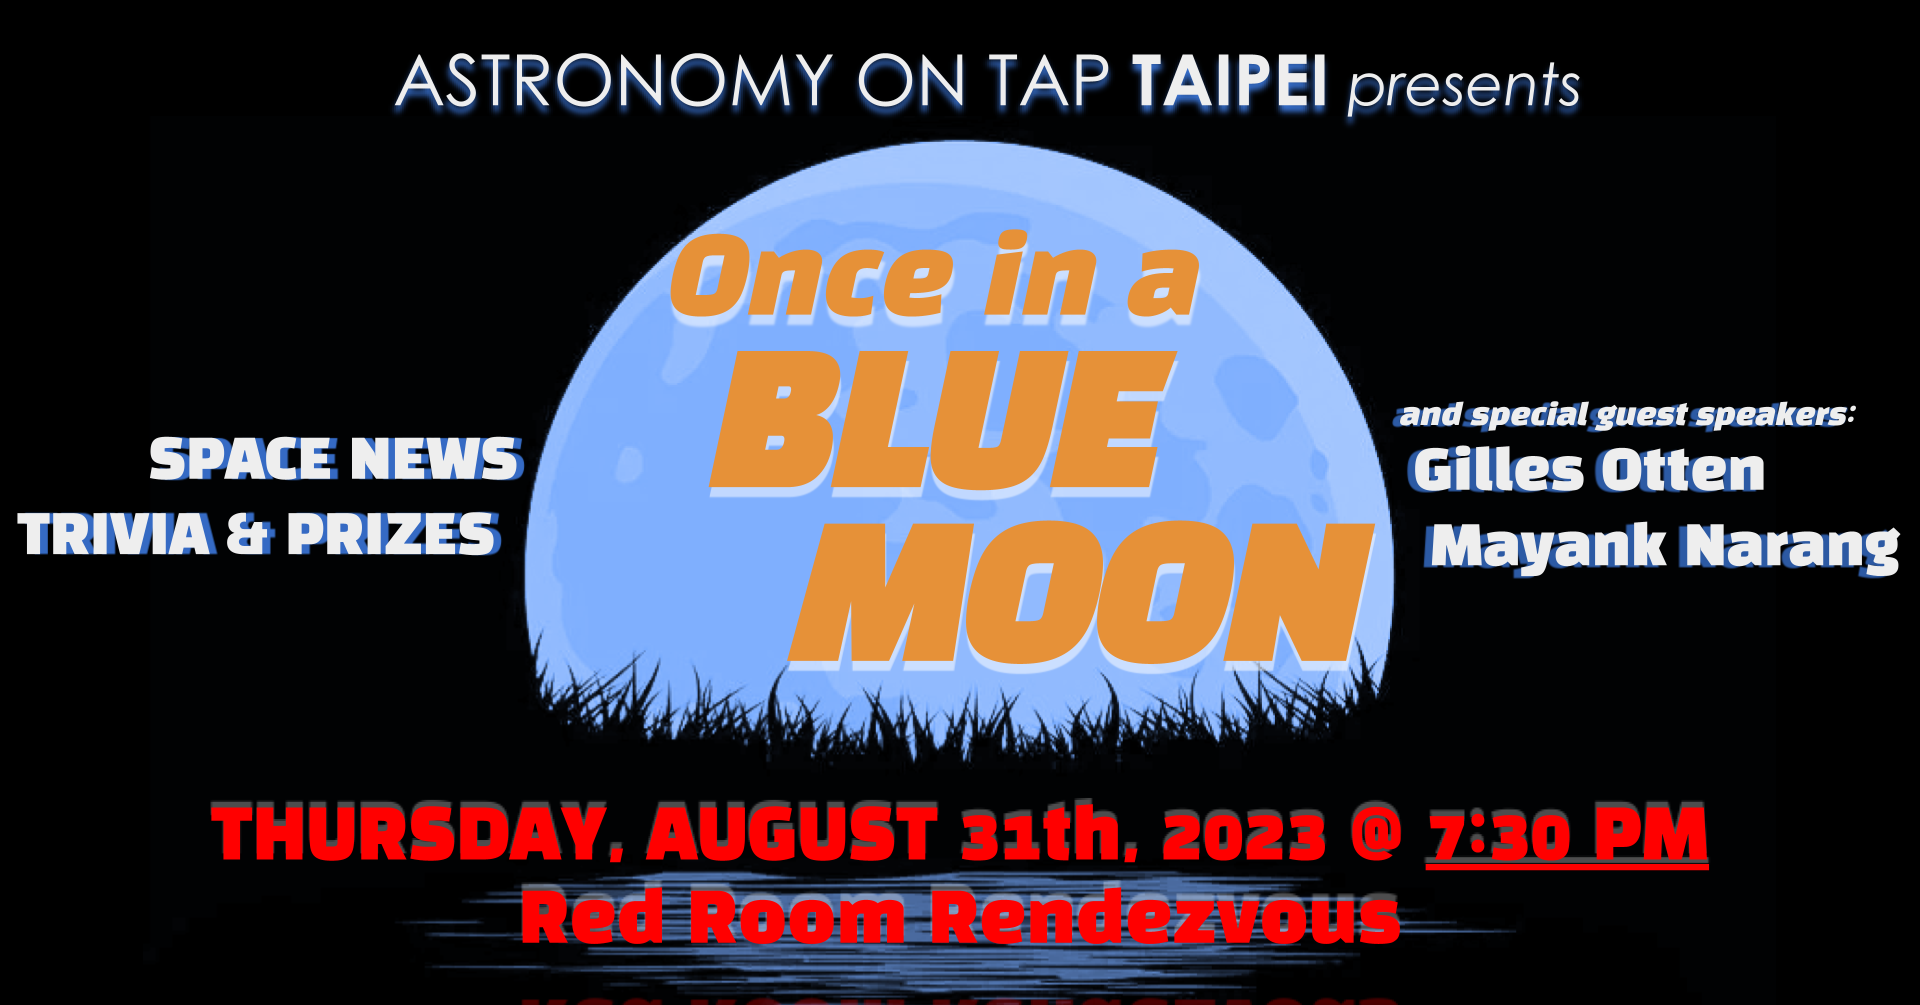 AoT Taipei presents: once in a blue moon. Join us at 7.30pm on 31st August 2023 at Red Room Rendezvous for a fun and science packed evening of talks and trivia!